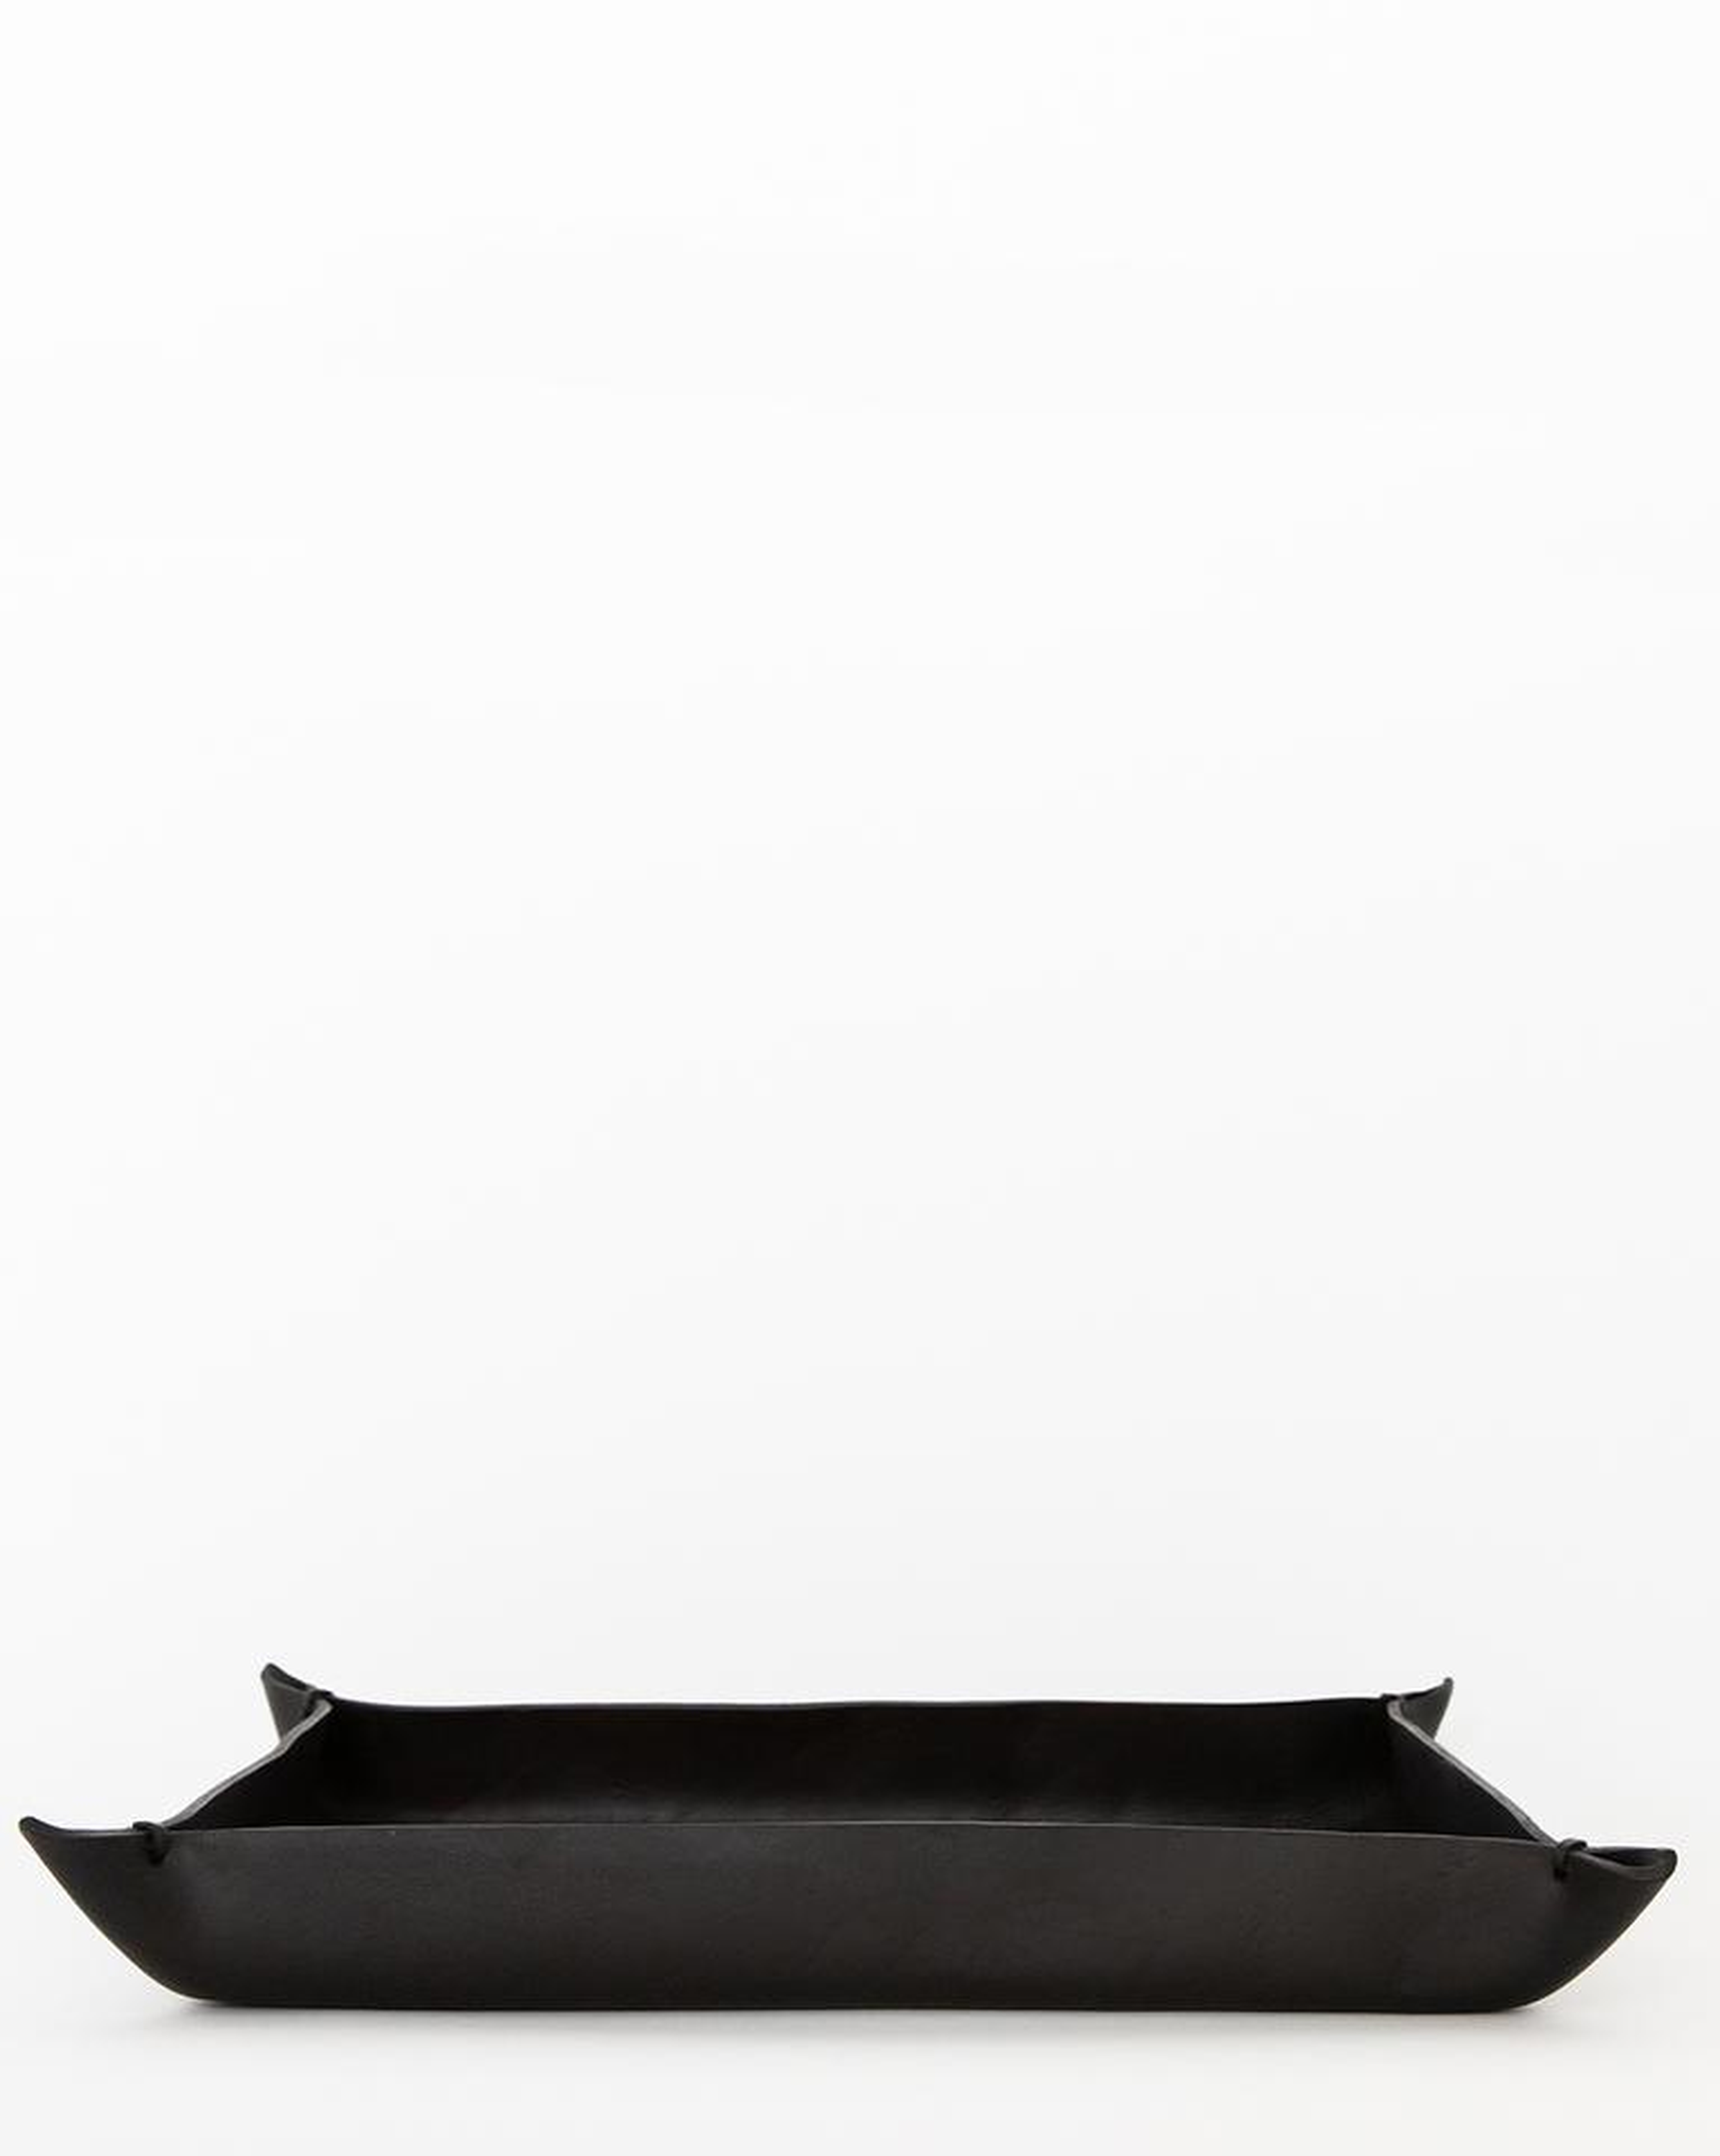 LEATHER CRAFTED TRAY-L - McGee & Co.